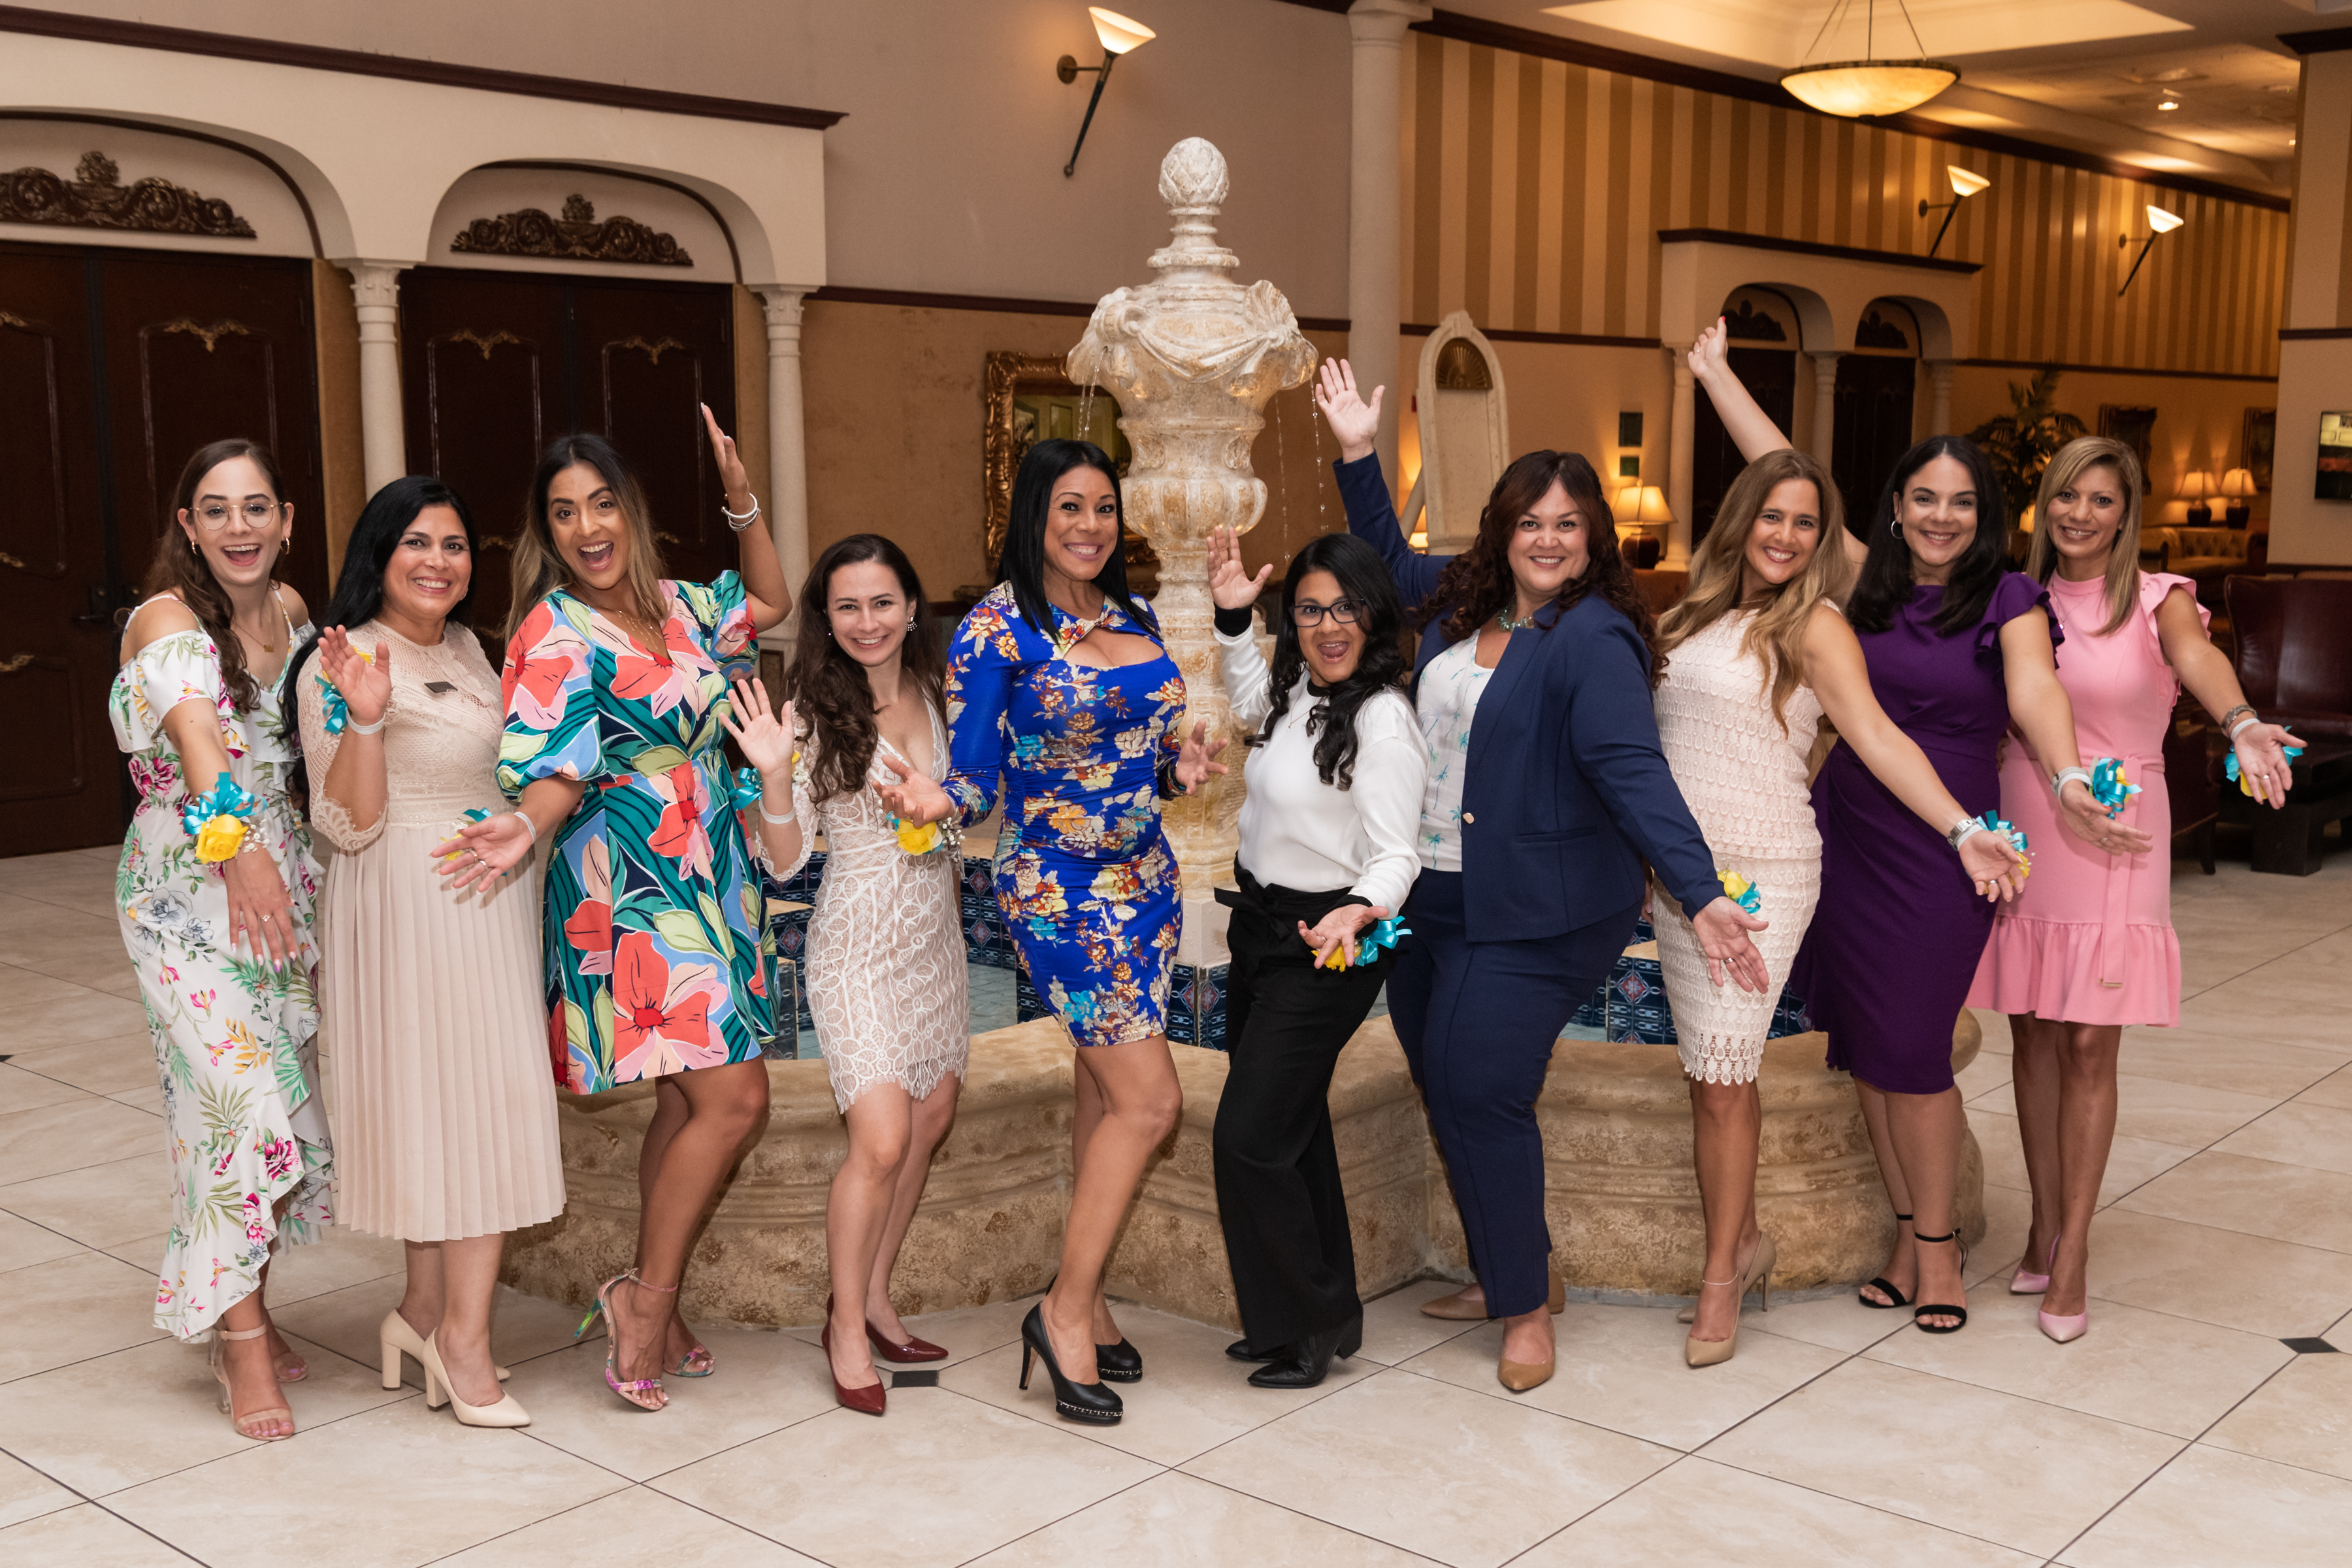 Dean Luna (third from right) with her fellow 2022 Hispanic Women of Distinction Honorees